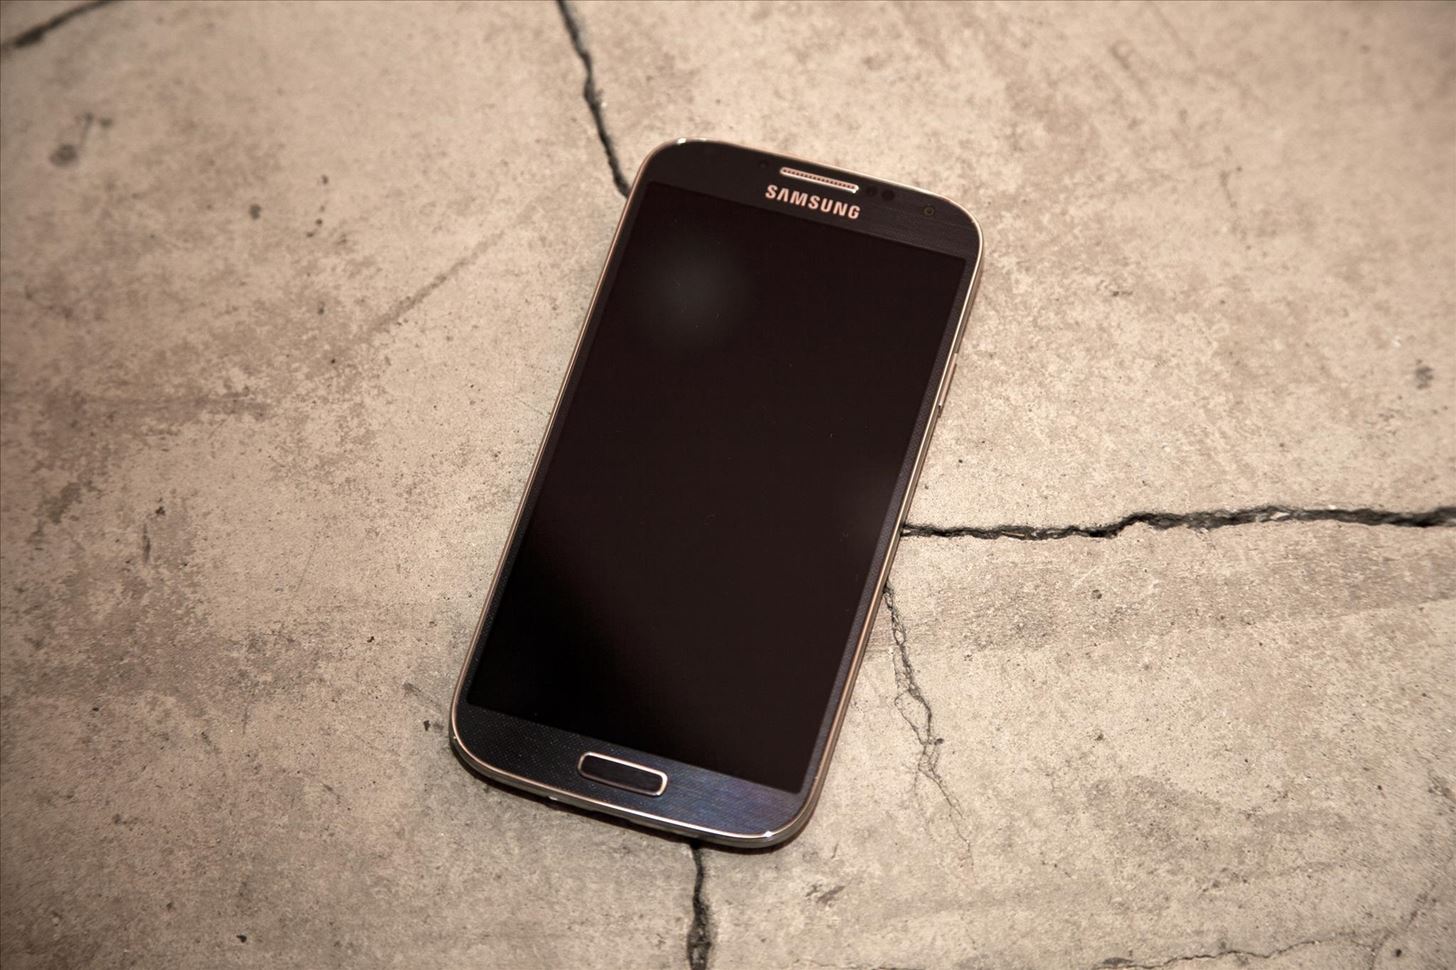 The Real Story Behind Rooting the Samsung Galaxy S4—And Its New Secured Kernel